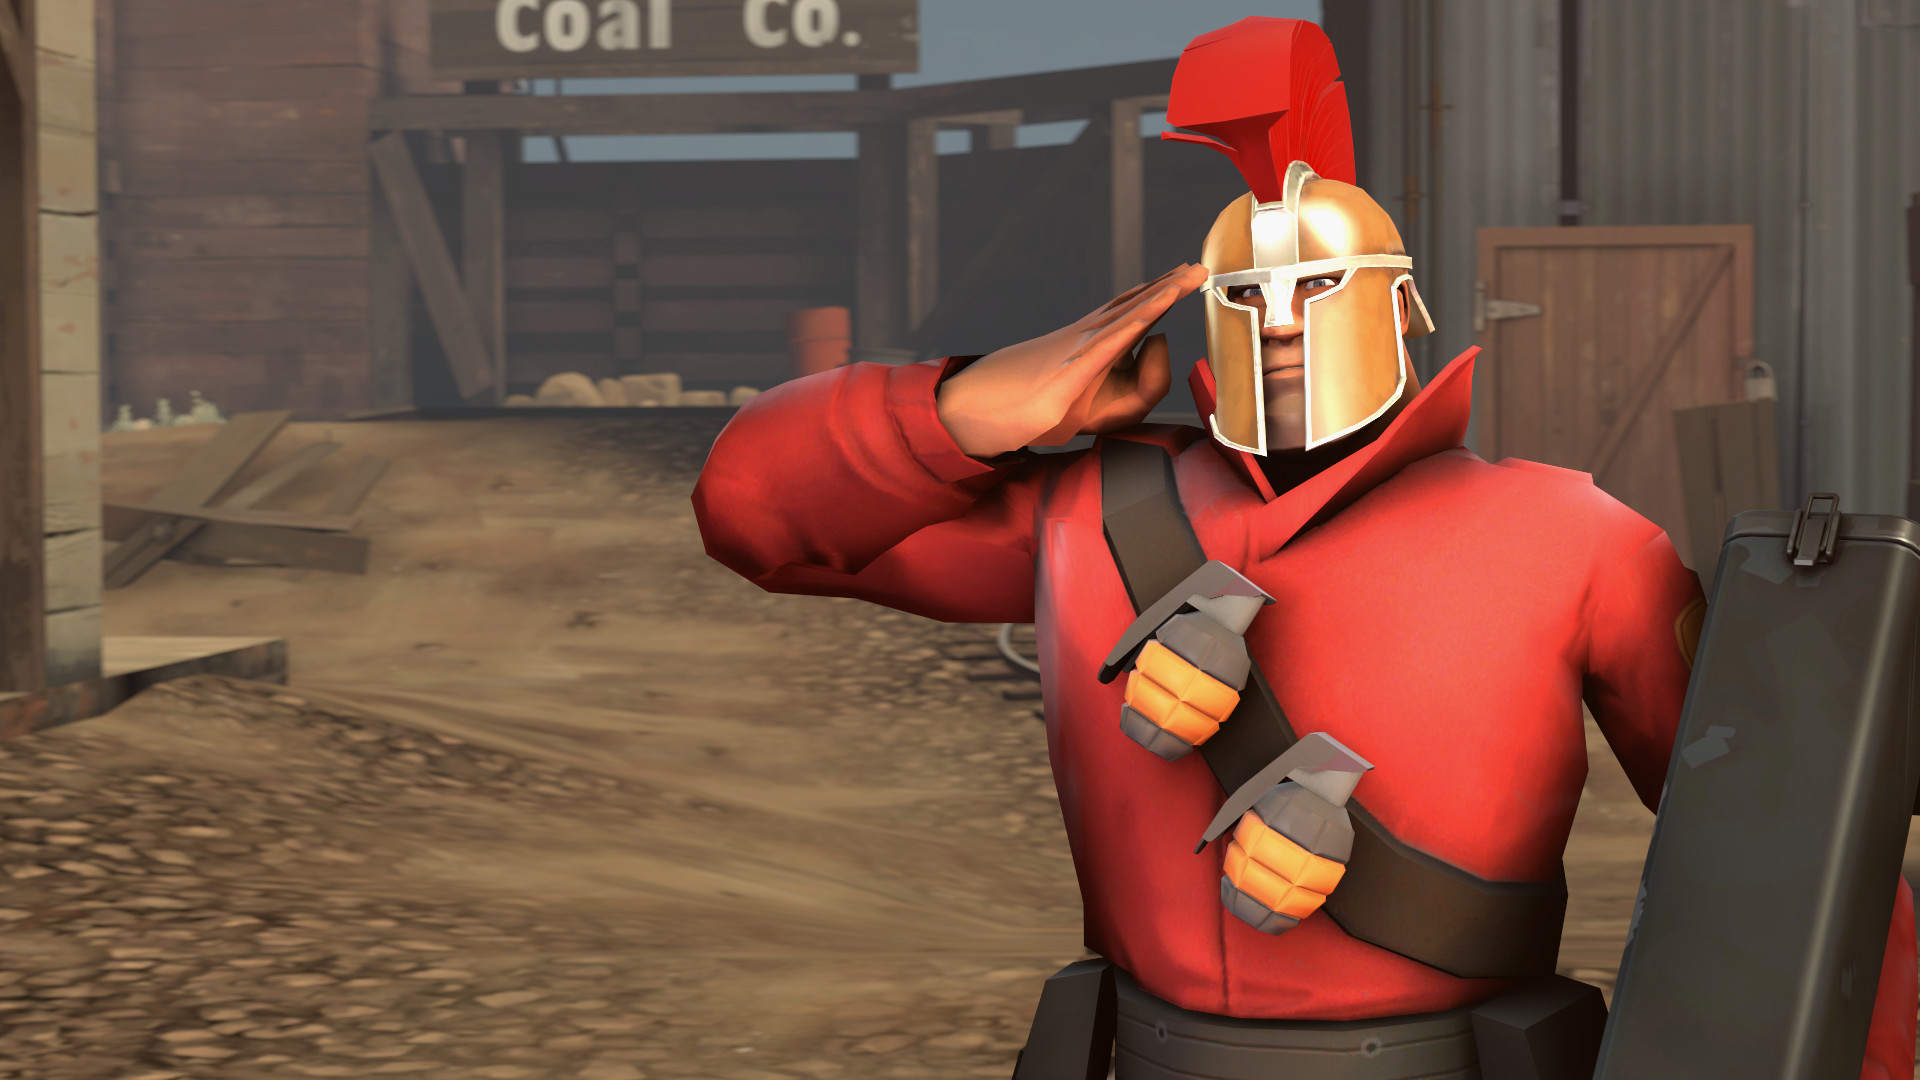 1920x1080 ... TF2 Loadout - Soldier 2 (Spartacus3321) by 360PraNKsTer